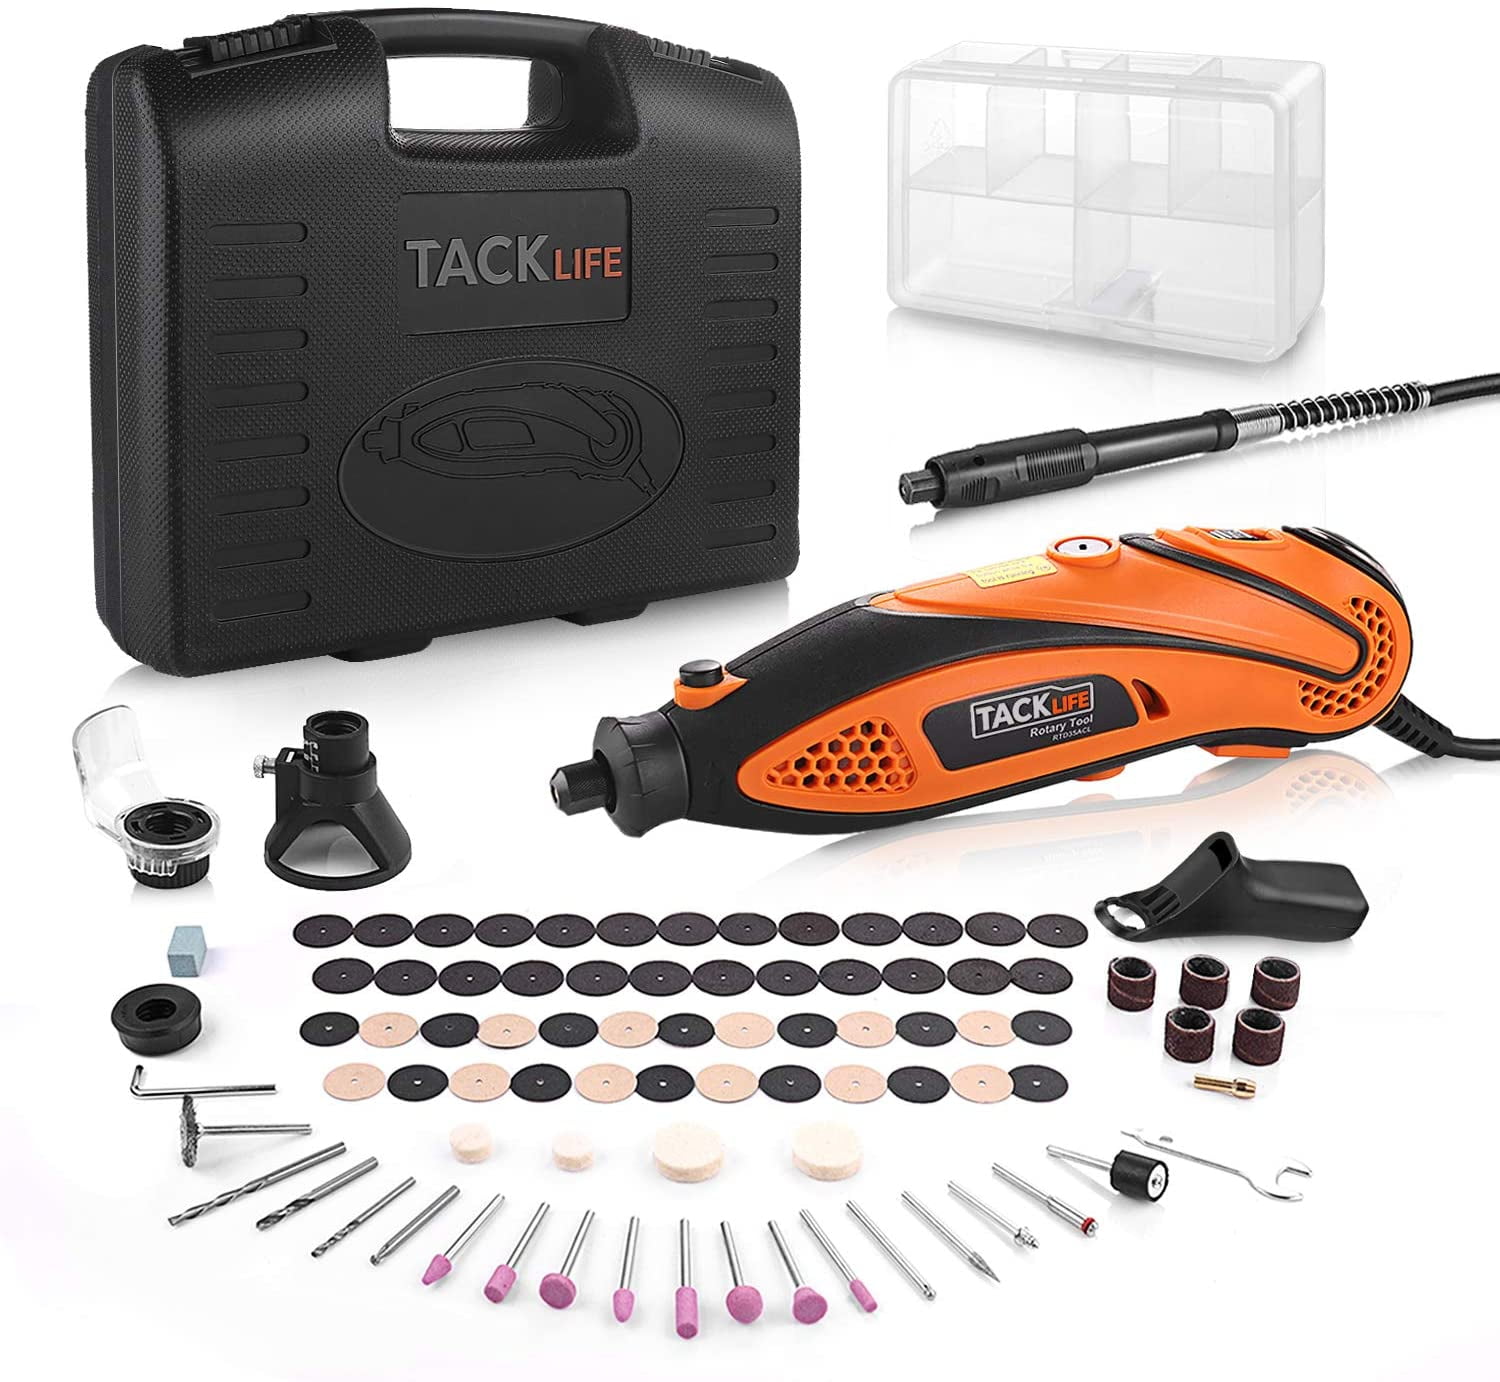 TACKLIFE Rotary Tool Kit With Upgraded MultiPro Keyless Chuck, Versatile  Accessories And 4 Attachments And Carrying Case, Multi-Functional For 